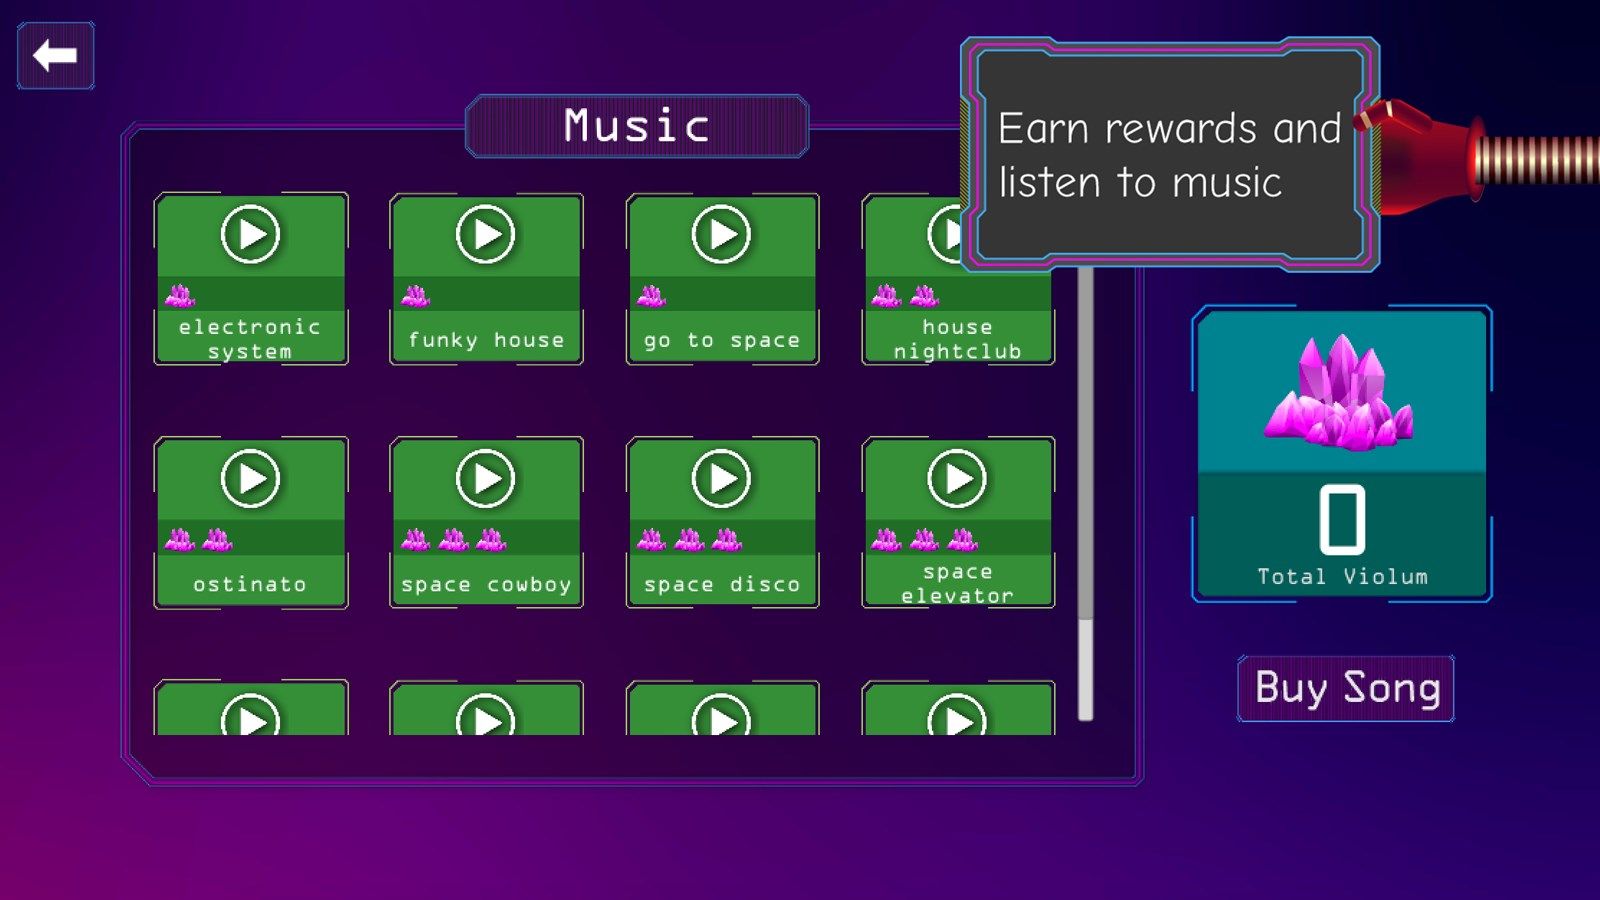 Earn rewards and listen to music